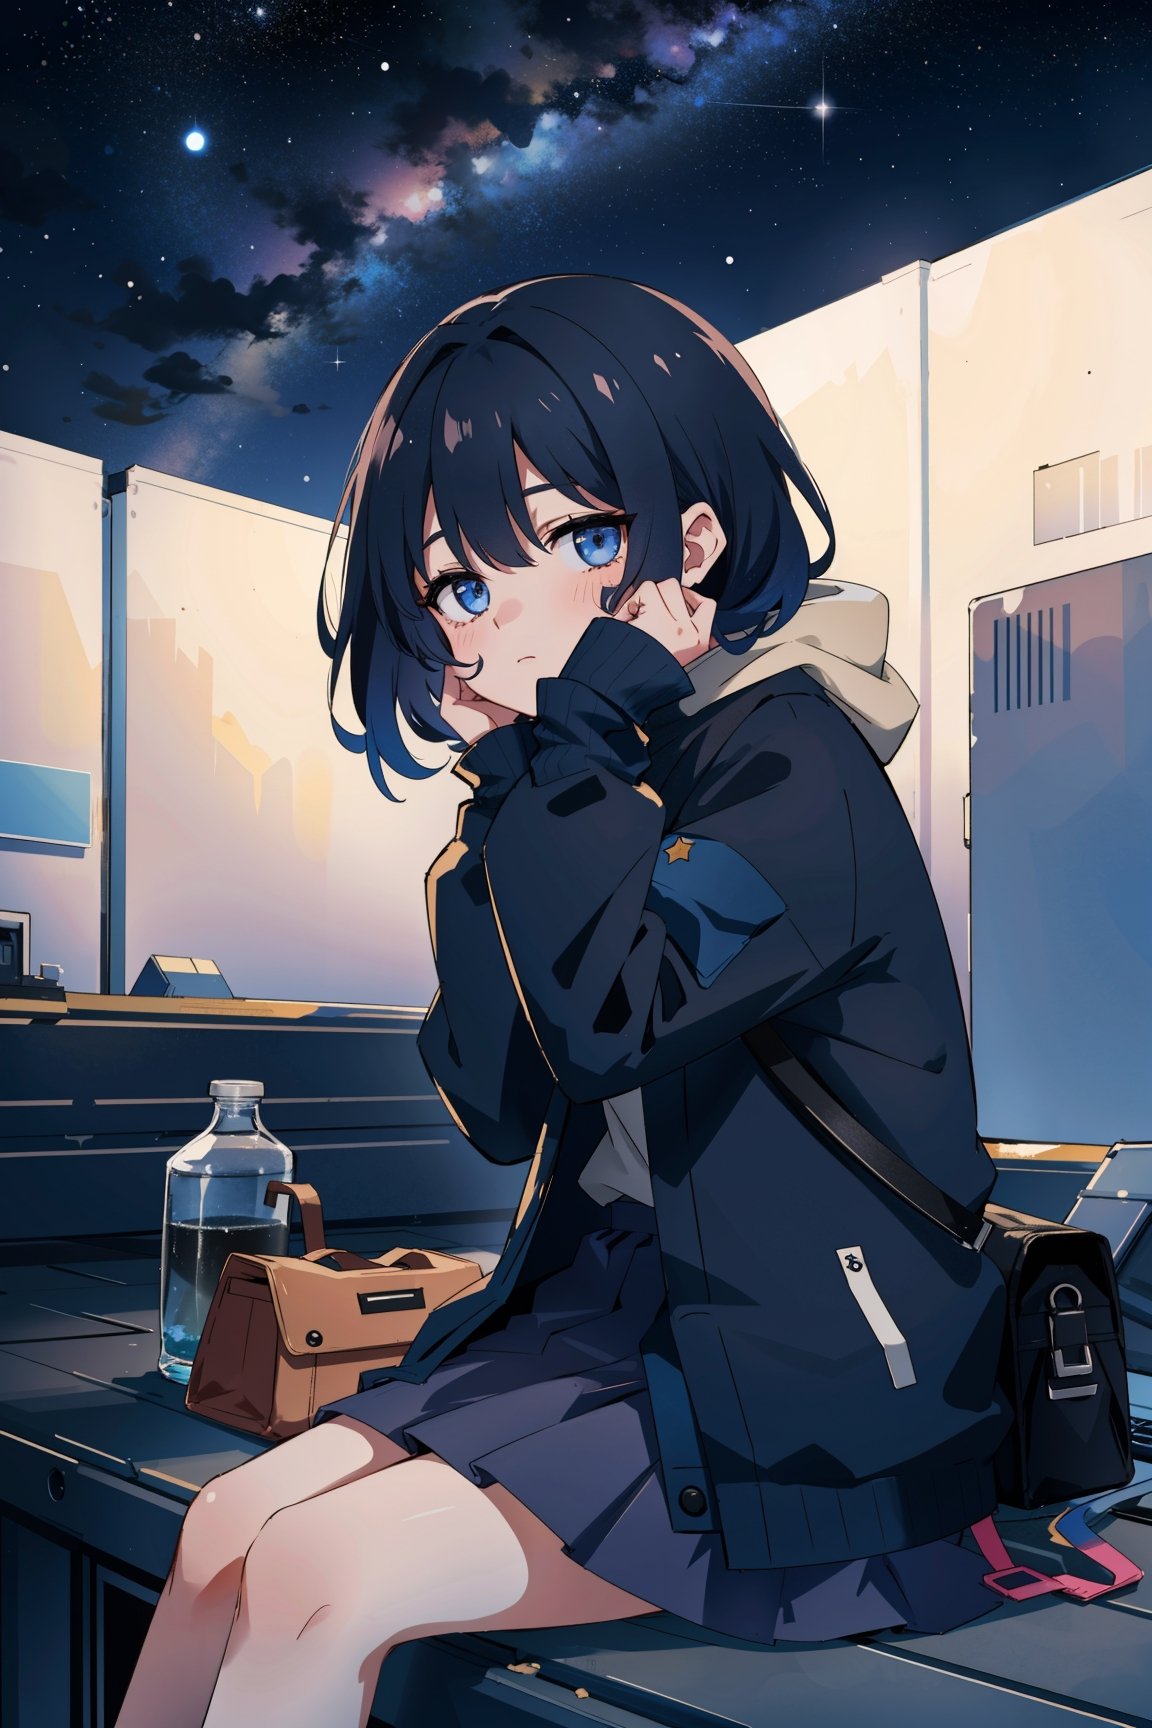 A girl sits on the rooftop, gazing up at the starry sky. The photograph captures only her silhouette, concealing her face.